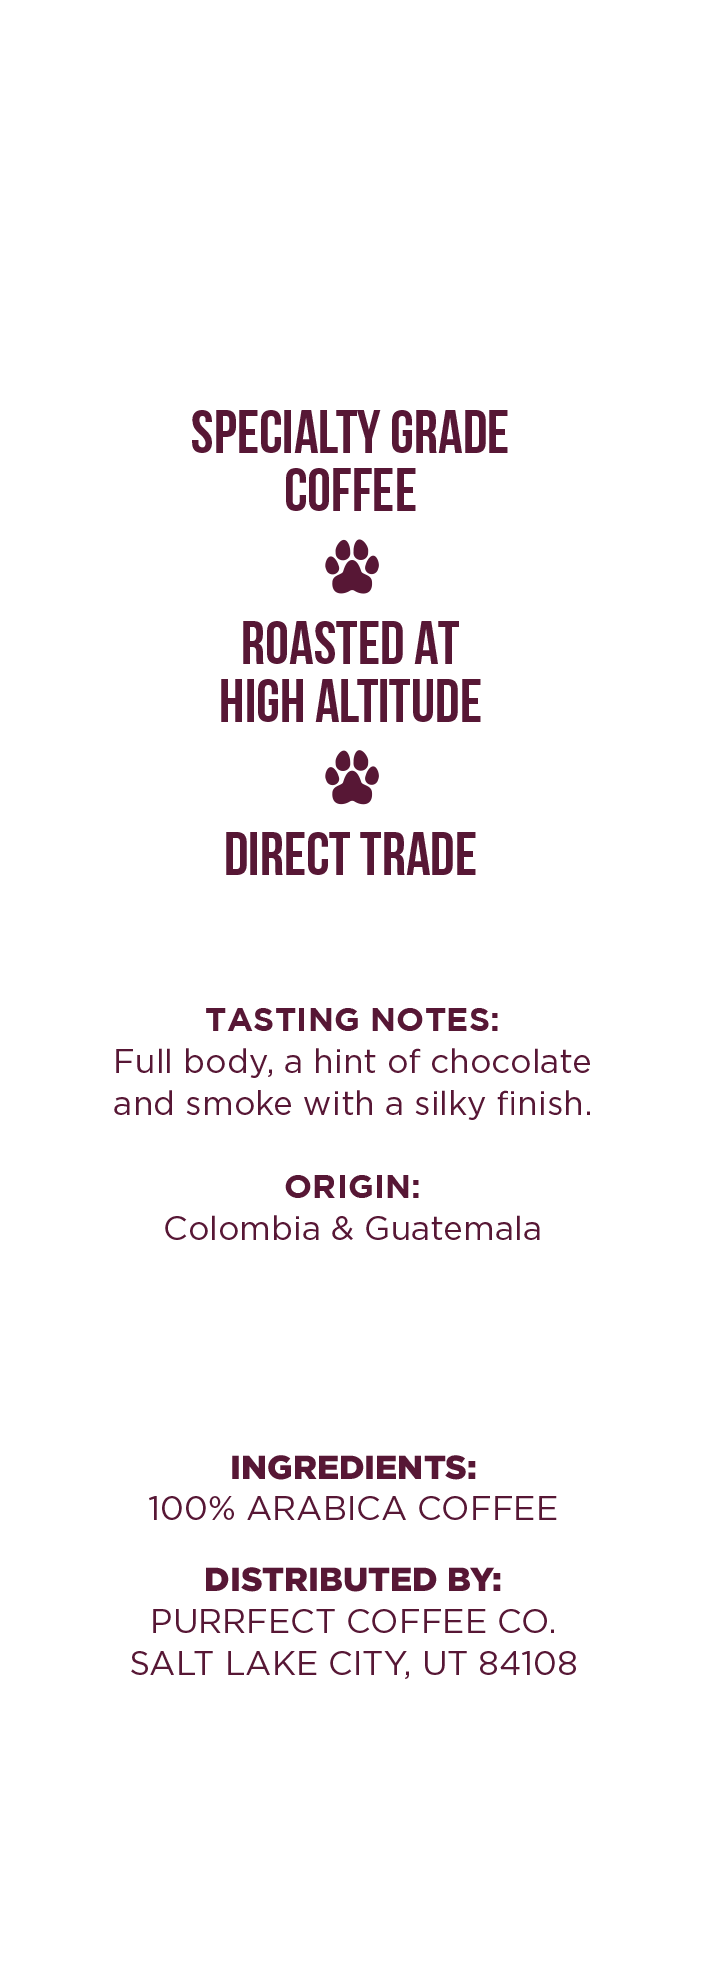 Aristocat Coffee - Elegant & Refined Blend | Purrfect Coffee's Luxury Selection